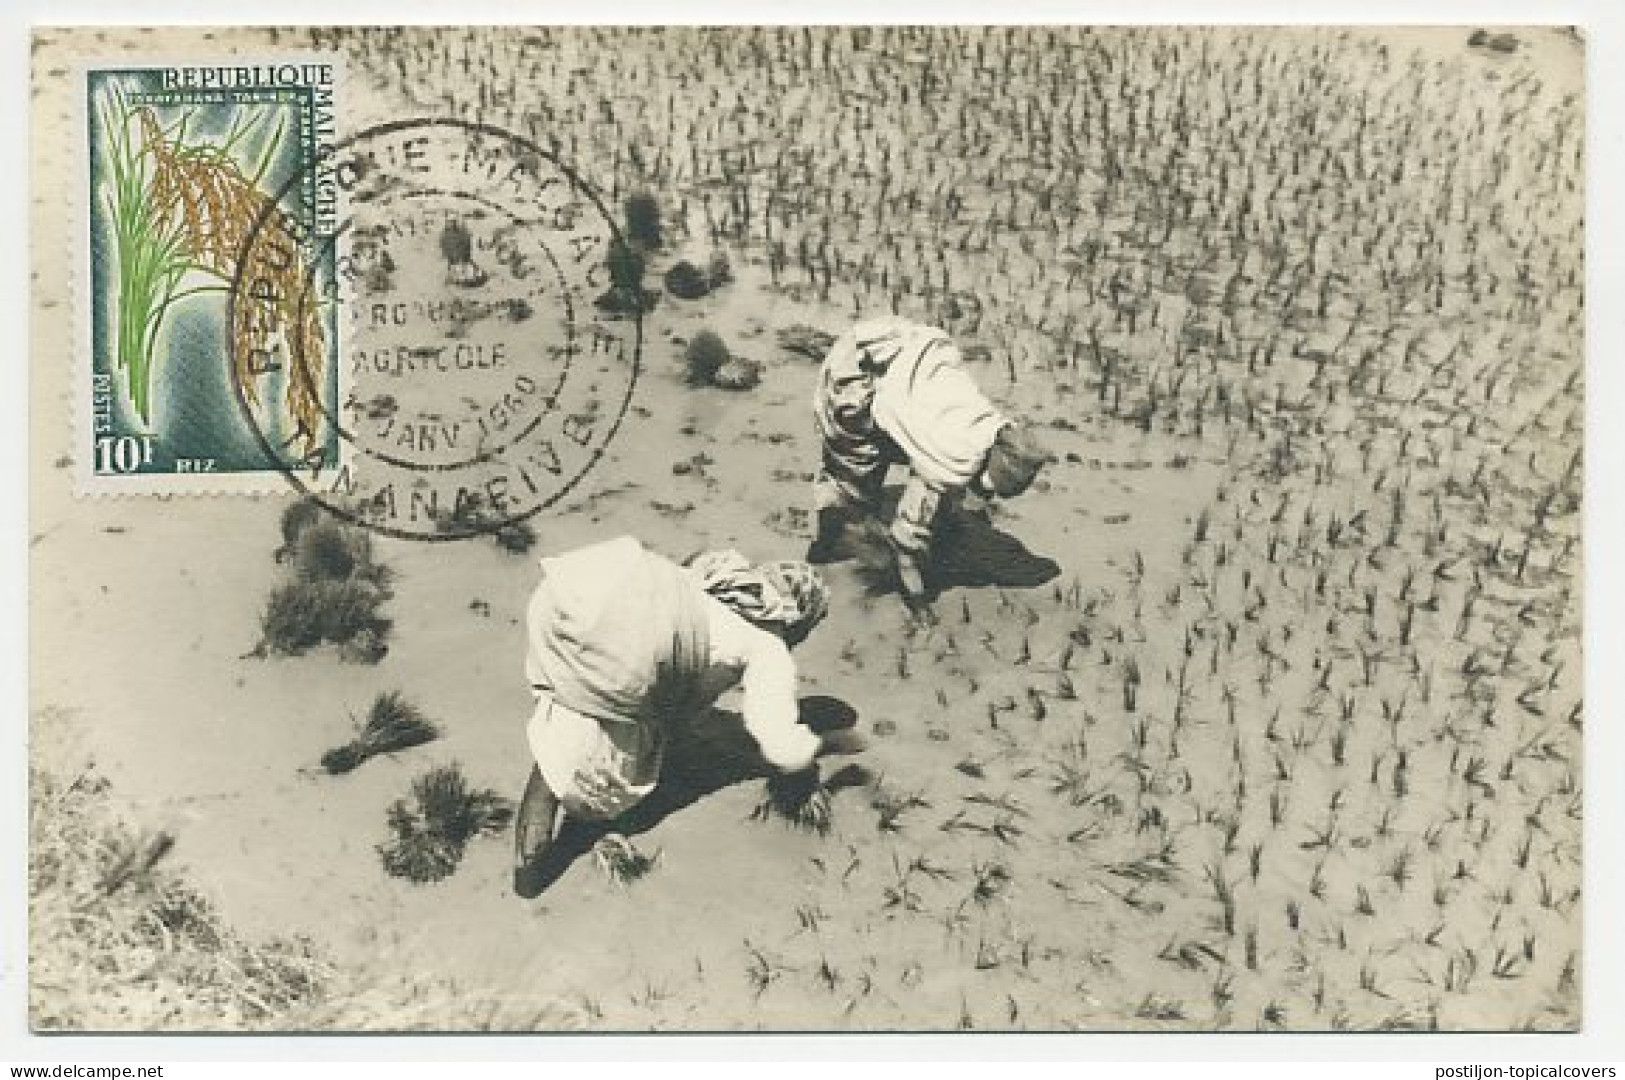 Maximum Card Malagasy 1960 Rice - Agriculture